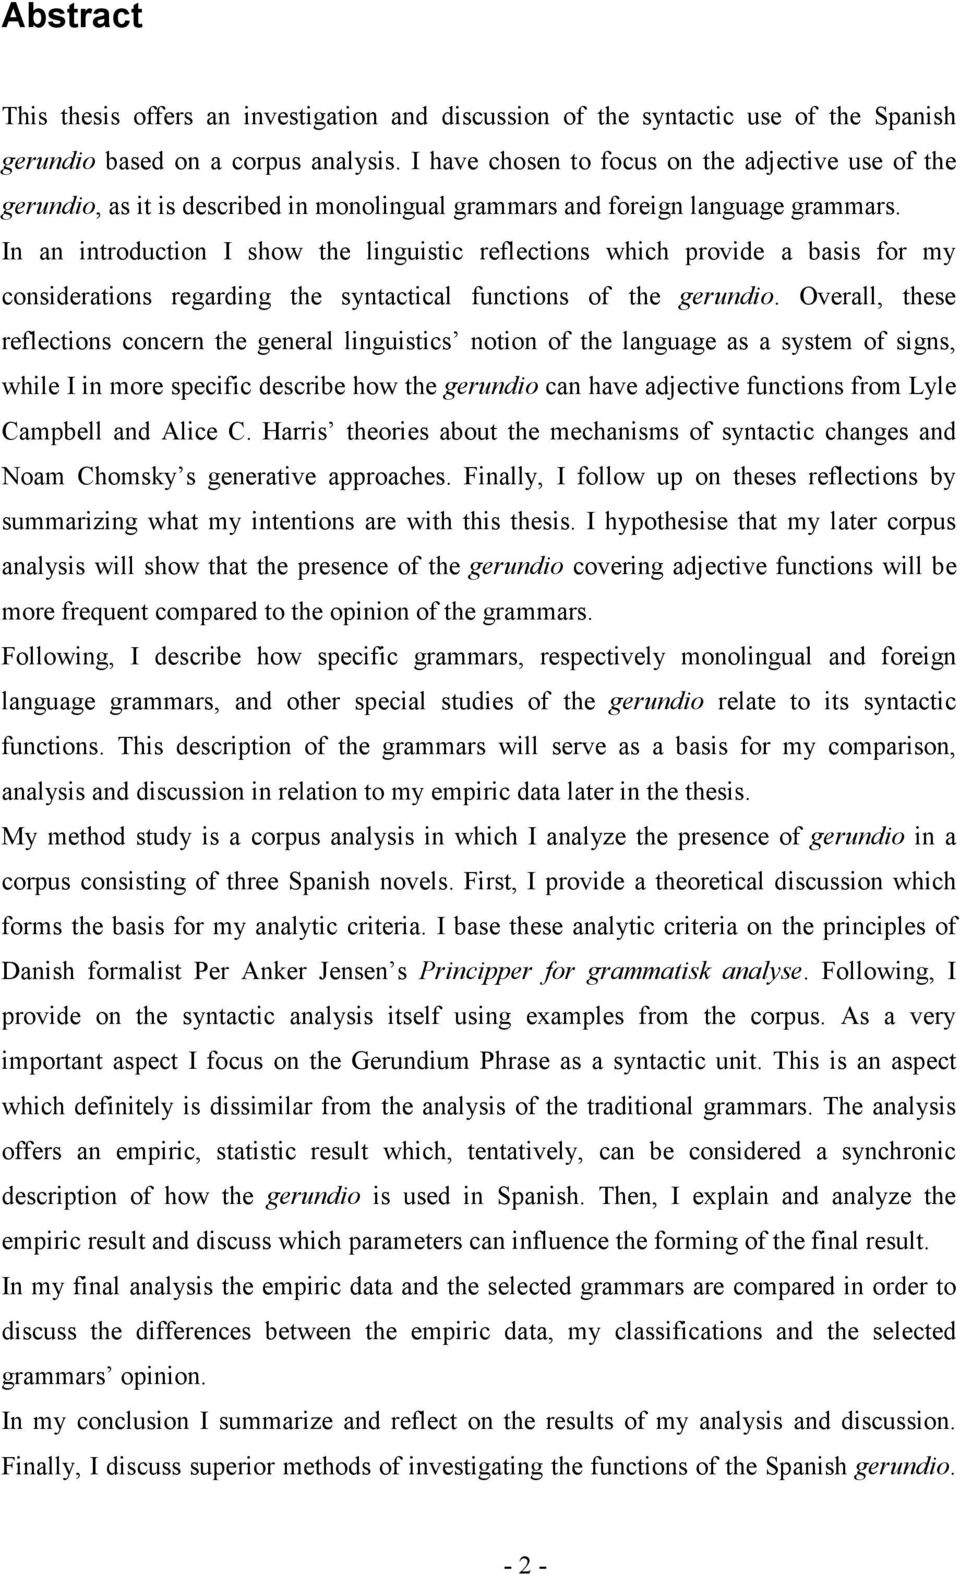 In an introduction I show the linguistic reflections which provide a basis for my considerations regarding the syntactical functions of the gerundio.